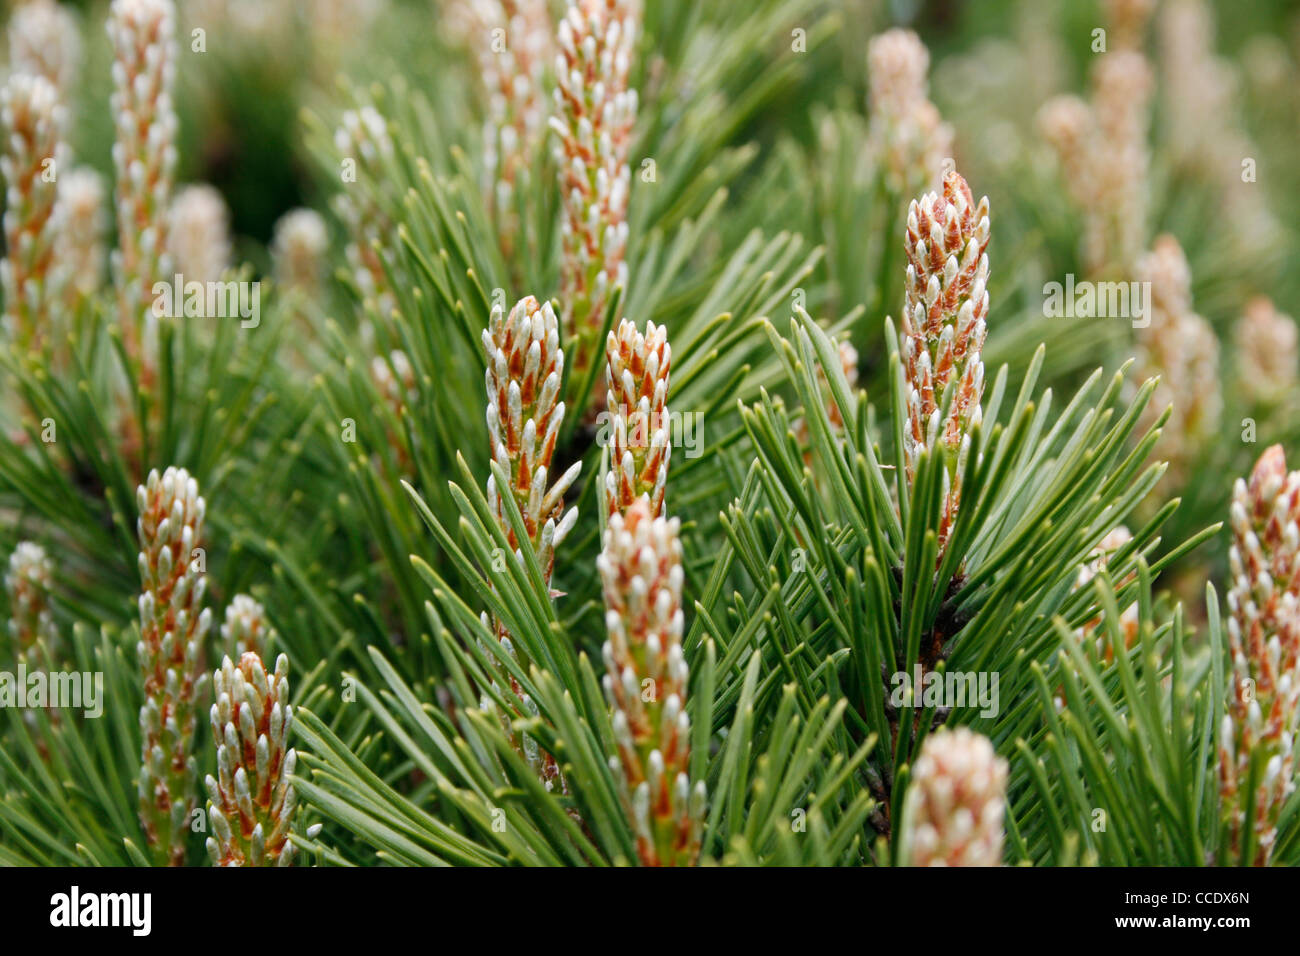 A shrub with needle or pine-like leaves (shallow depth of field) Stock Photo